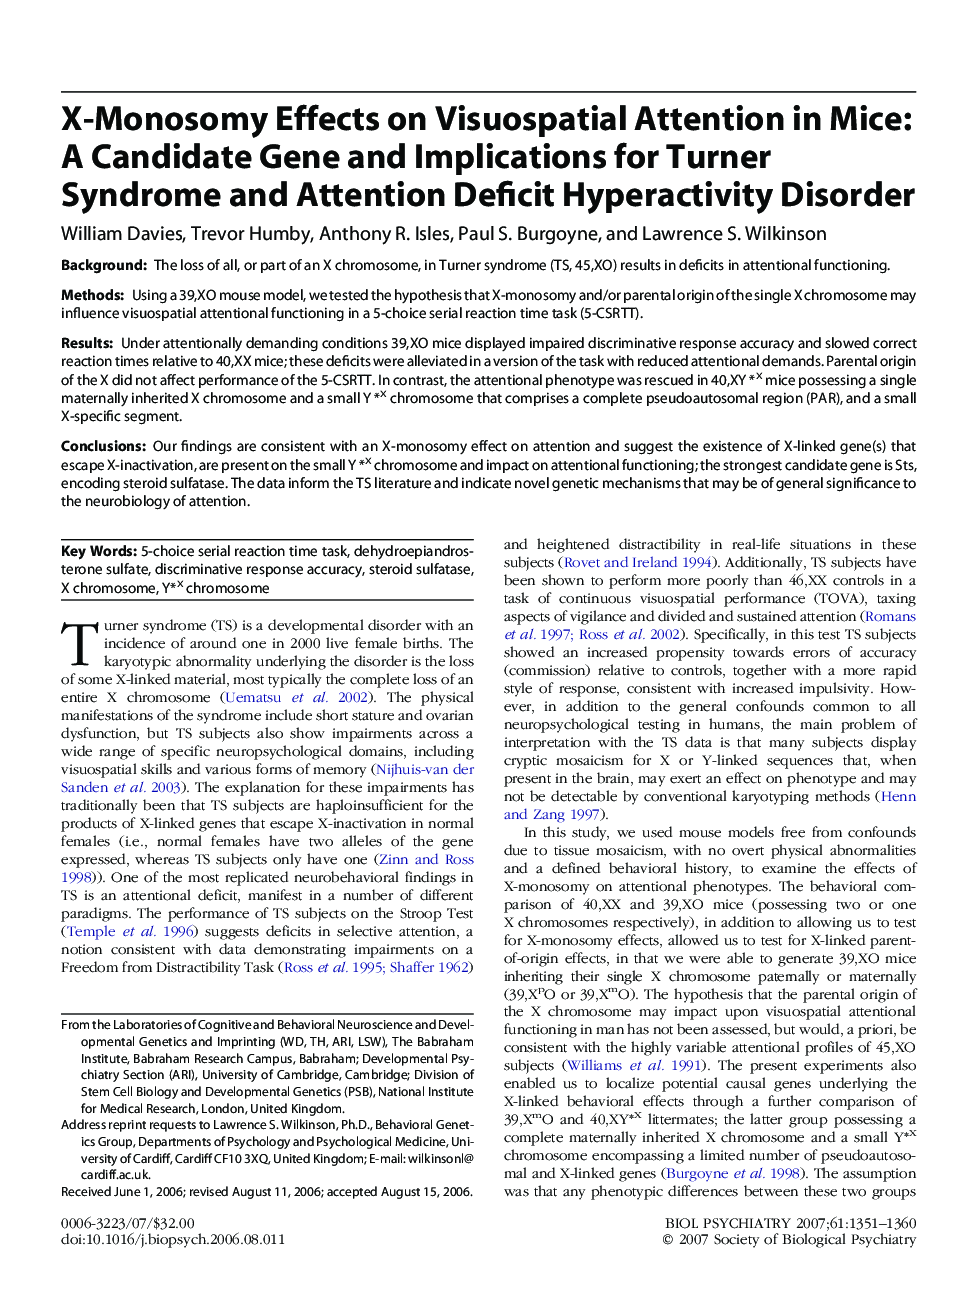 X-Monosomy Effects on Visuospatial Attention in Mice: A Candidate Gene and Implications for Turner Syndrome and Attention Deficit Hyperactivity Disorder